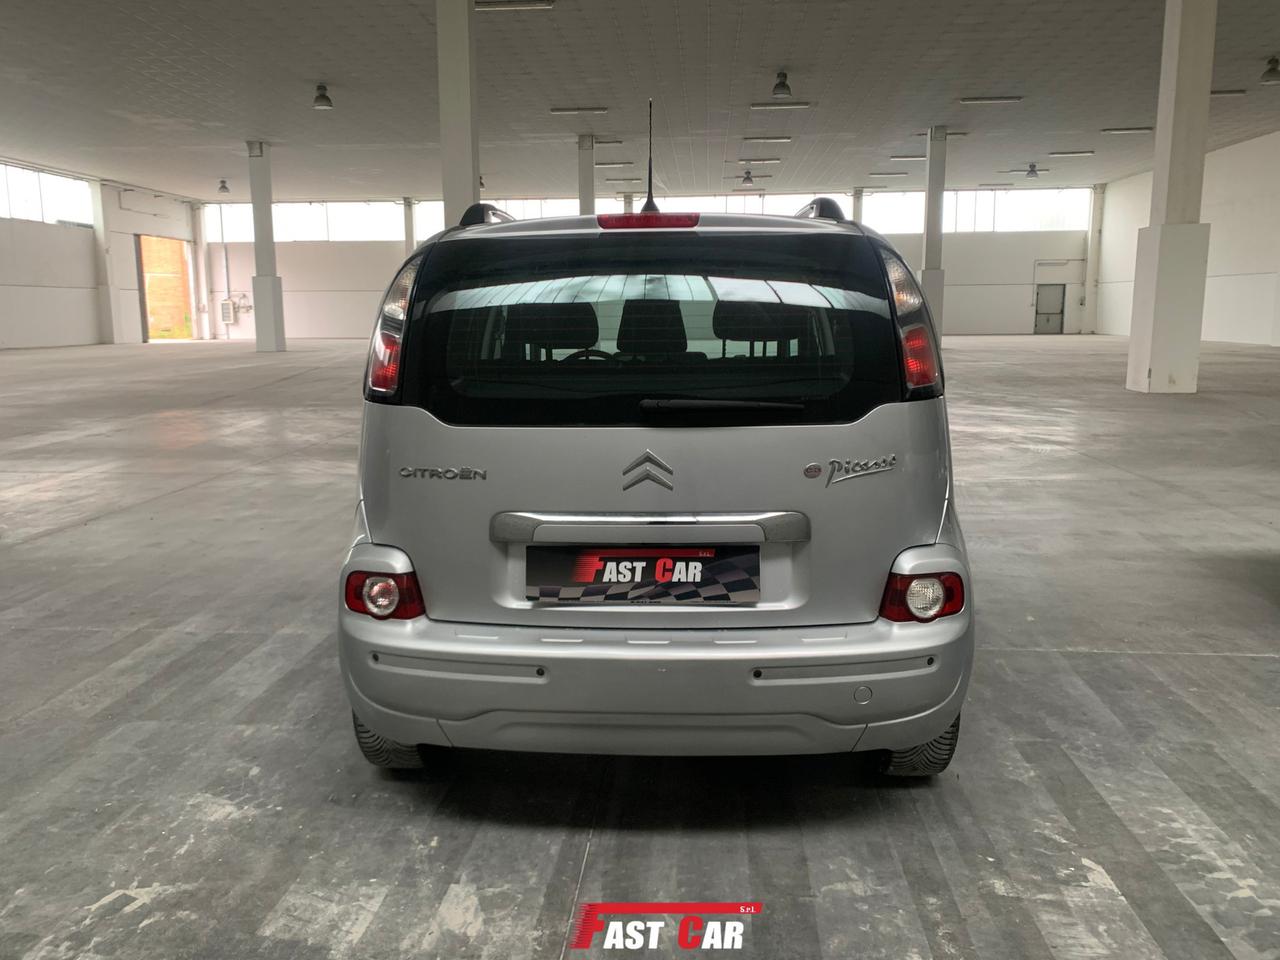 Citroen C3 Picasso 1.6 HDi 110 airdream Exclusive Style